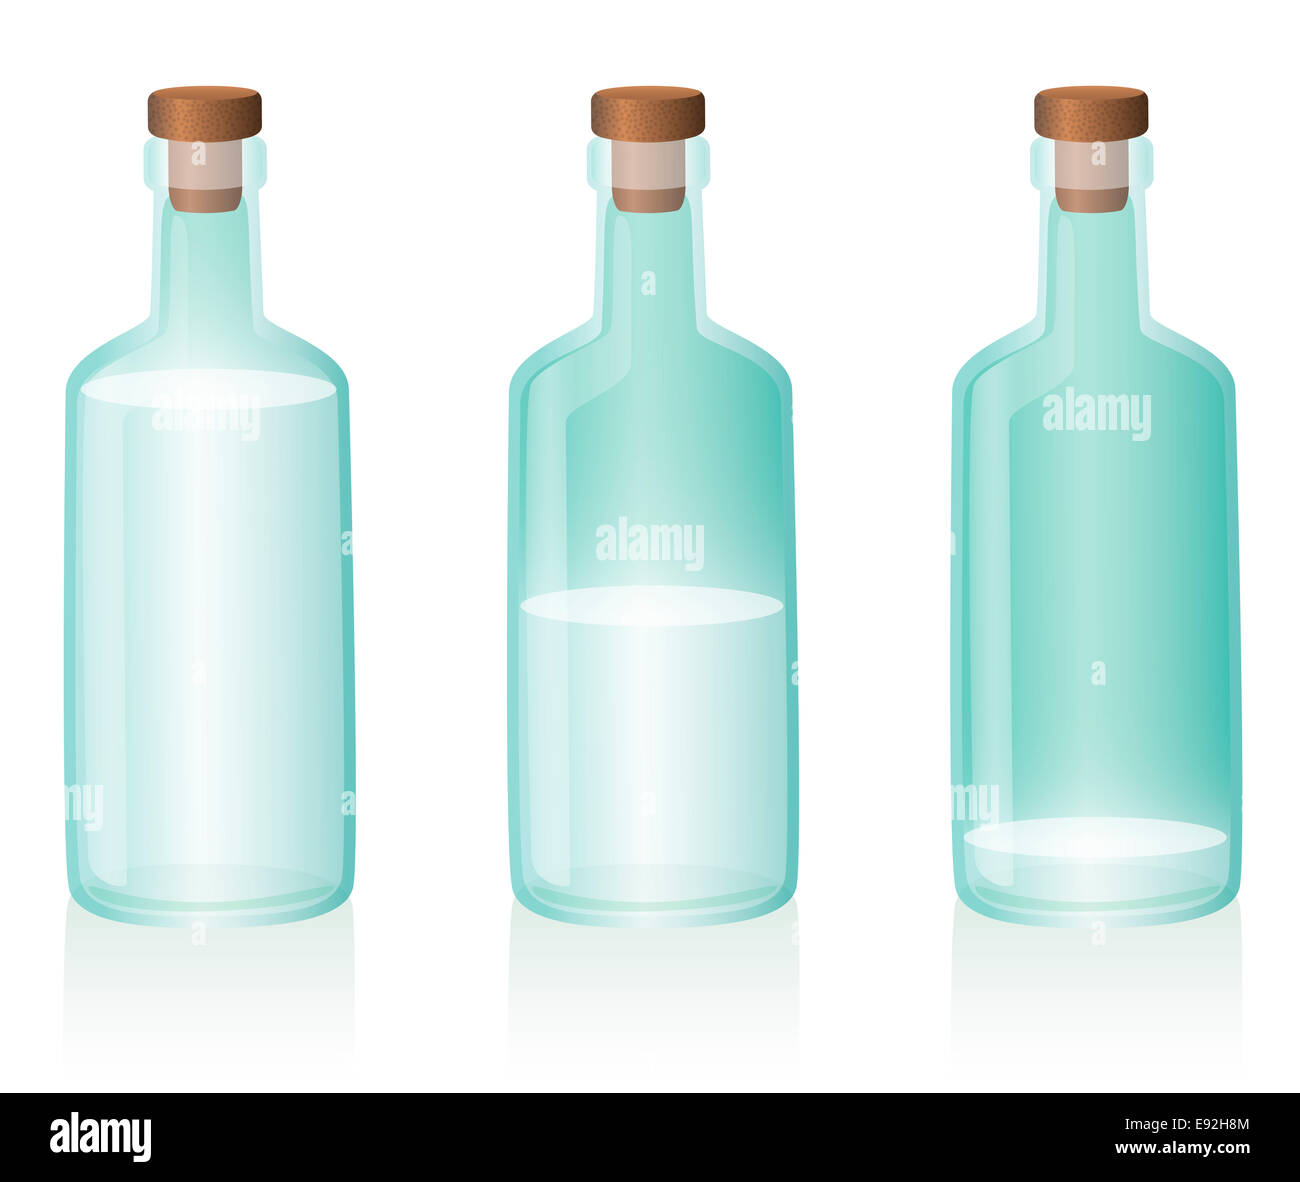 Three glass bottles, the first one is full, the second one is half full, the third one is nearly empty. Stock Photo